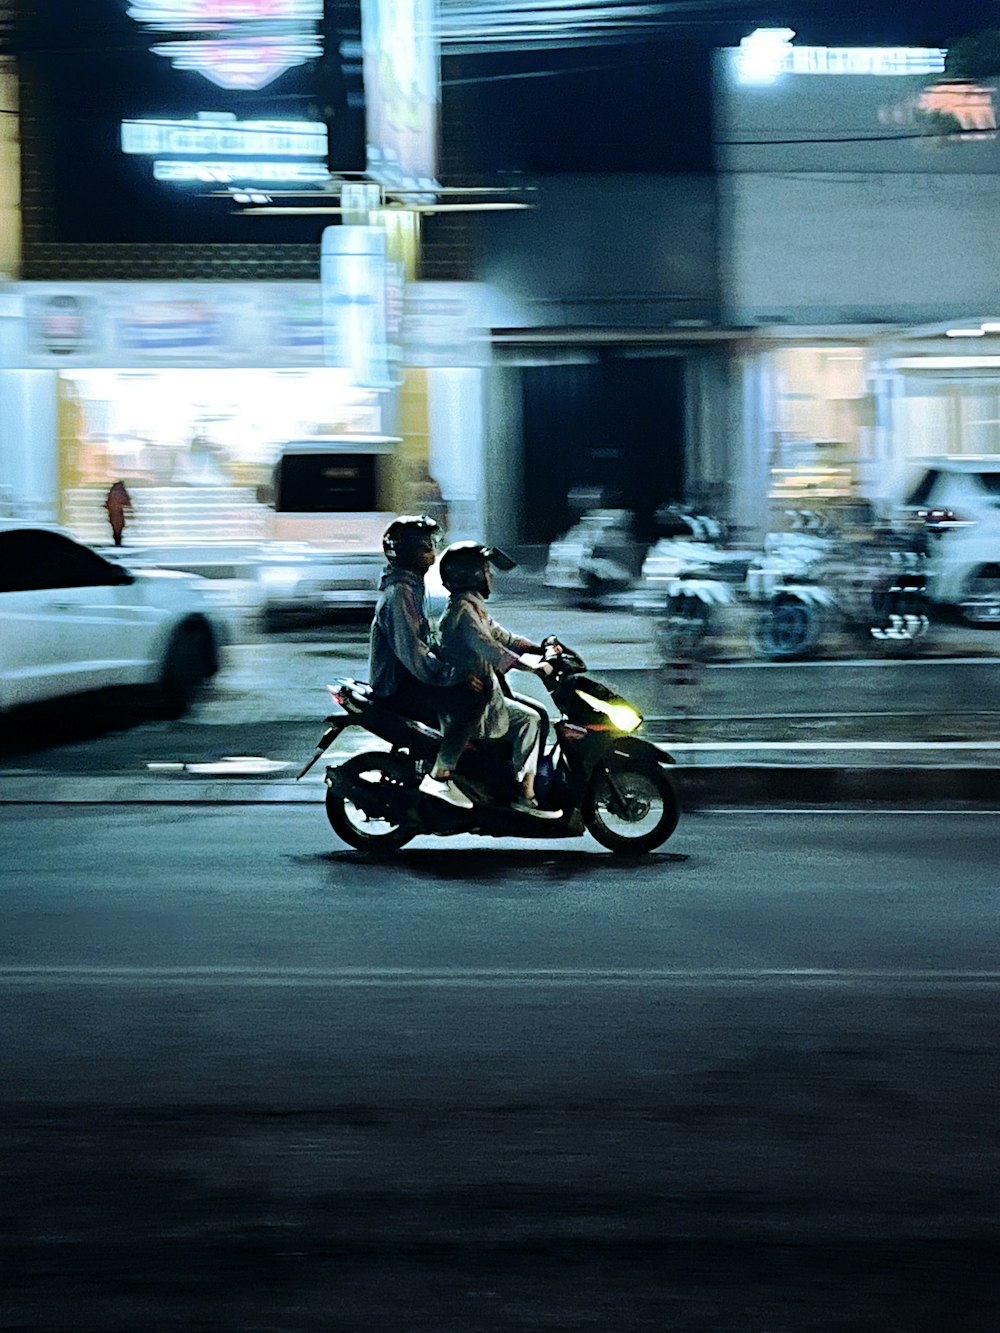 two people riding a motorcycle on a city street